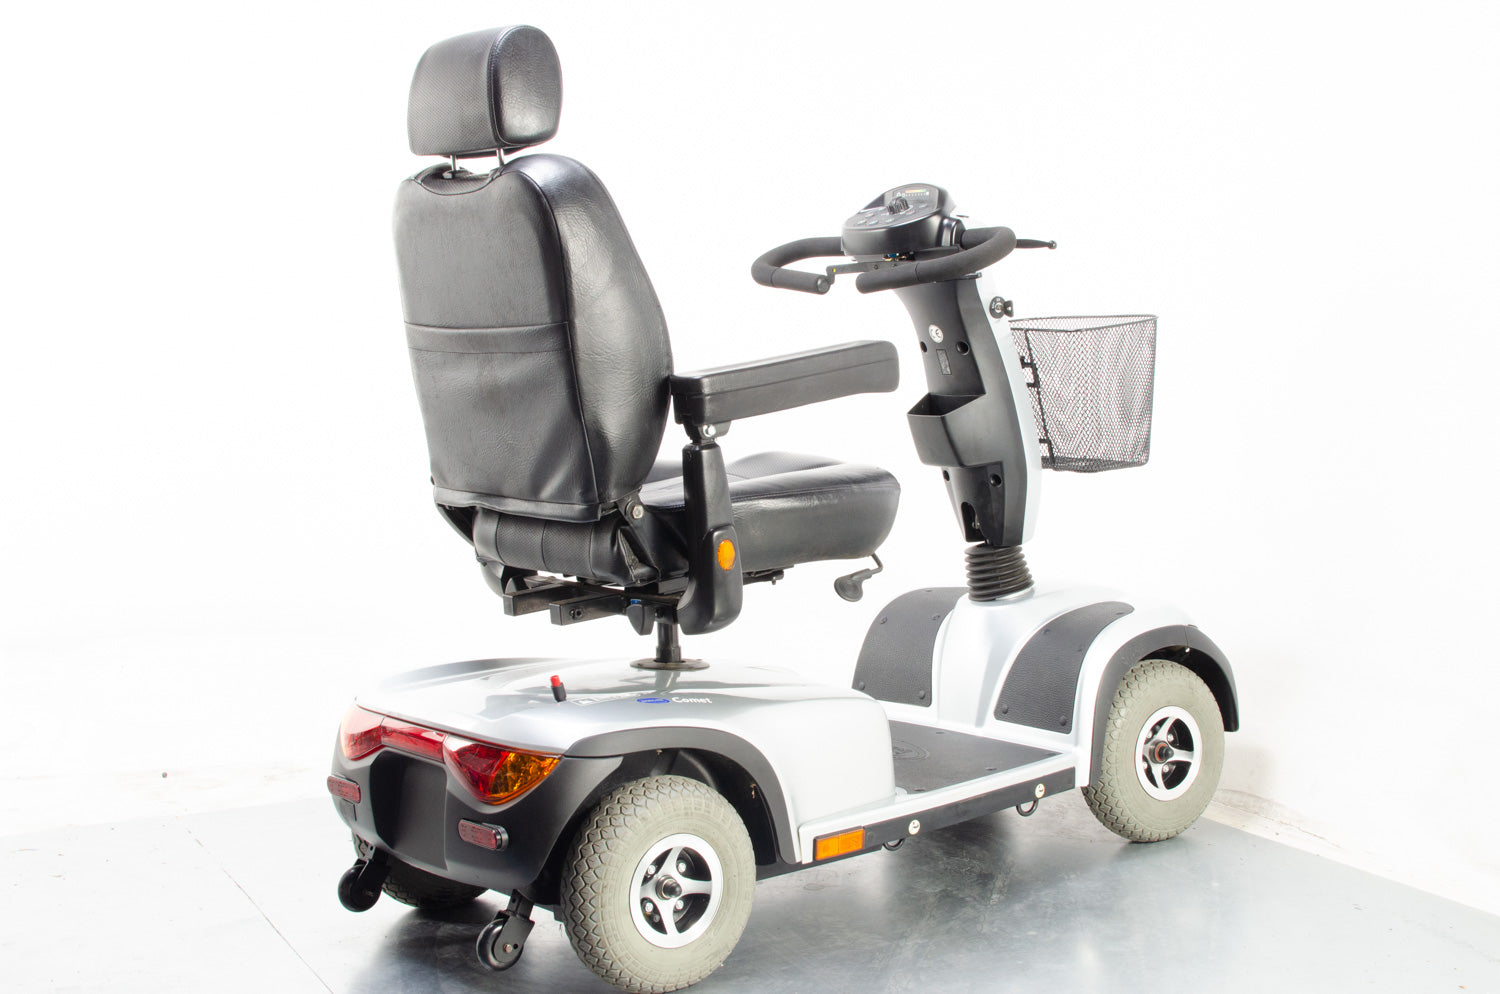 2013 Invacare Comet 8mph Large Size Comfort Mobility Scooter in Silver